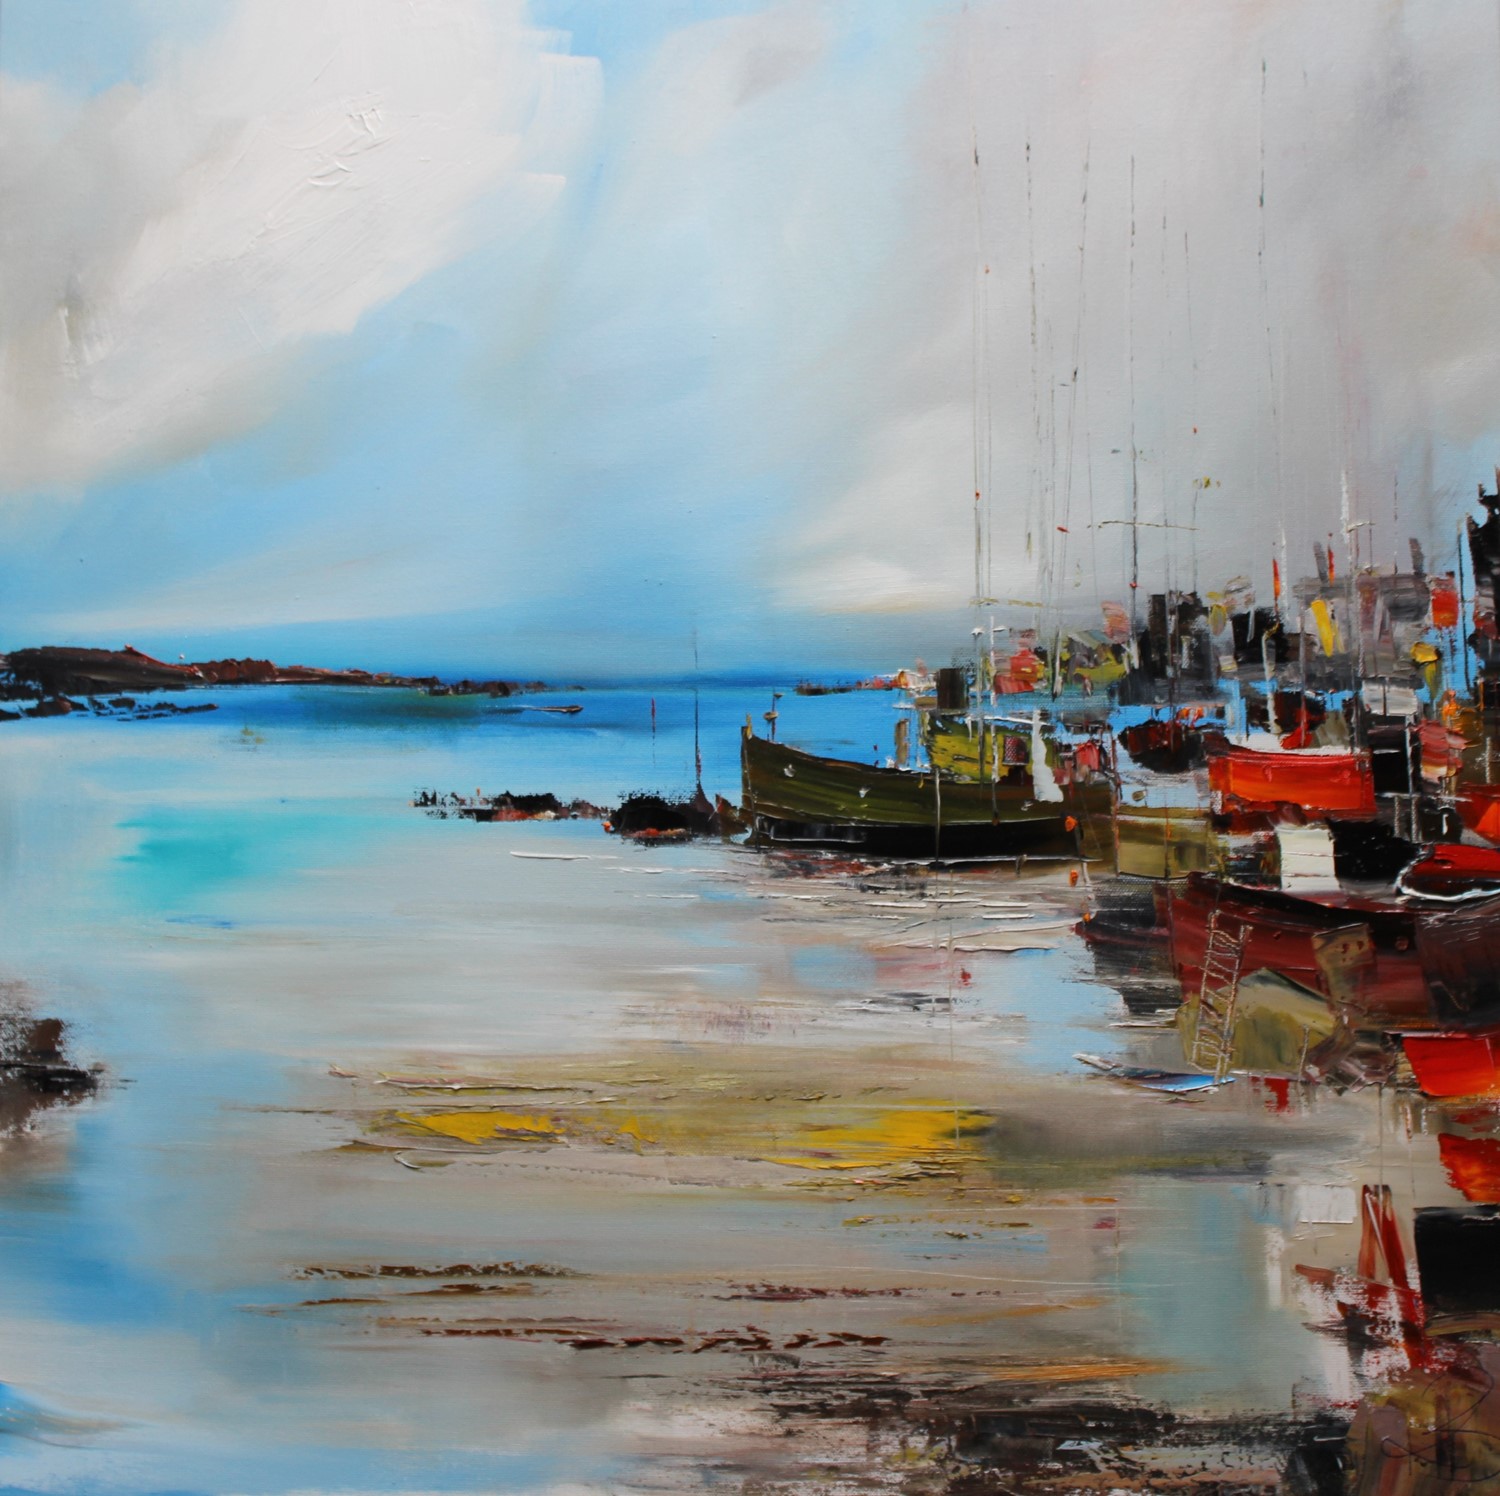 'At the Harbour for the Day' by artist Rosanne Barr